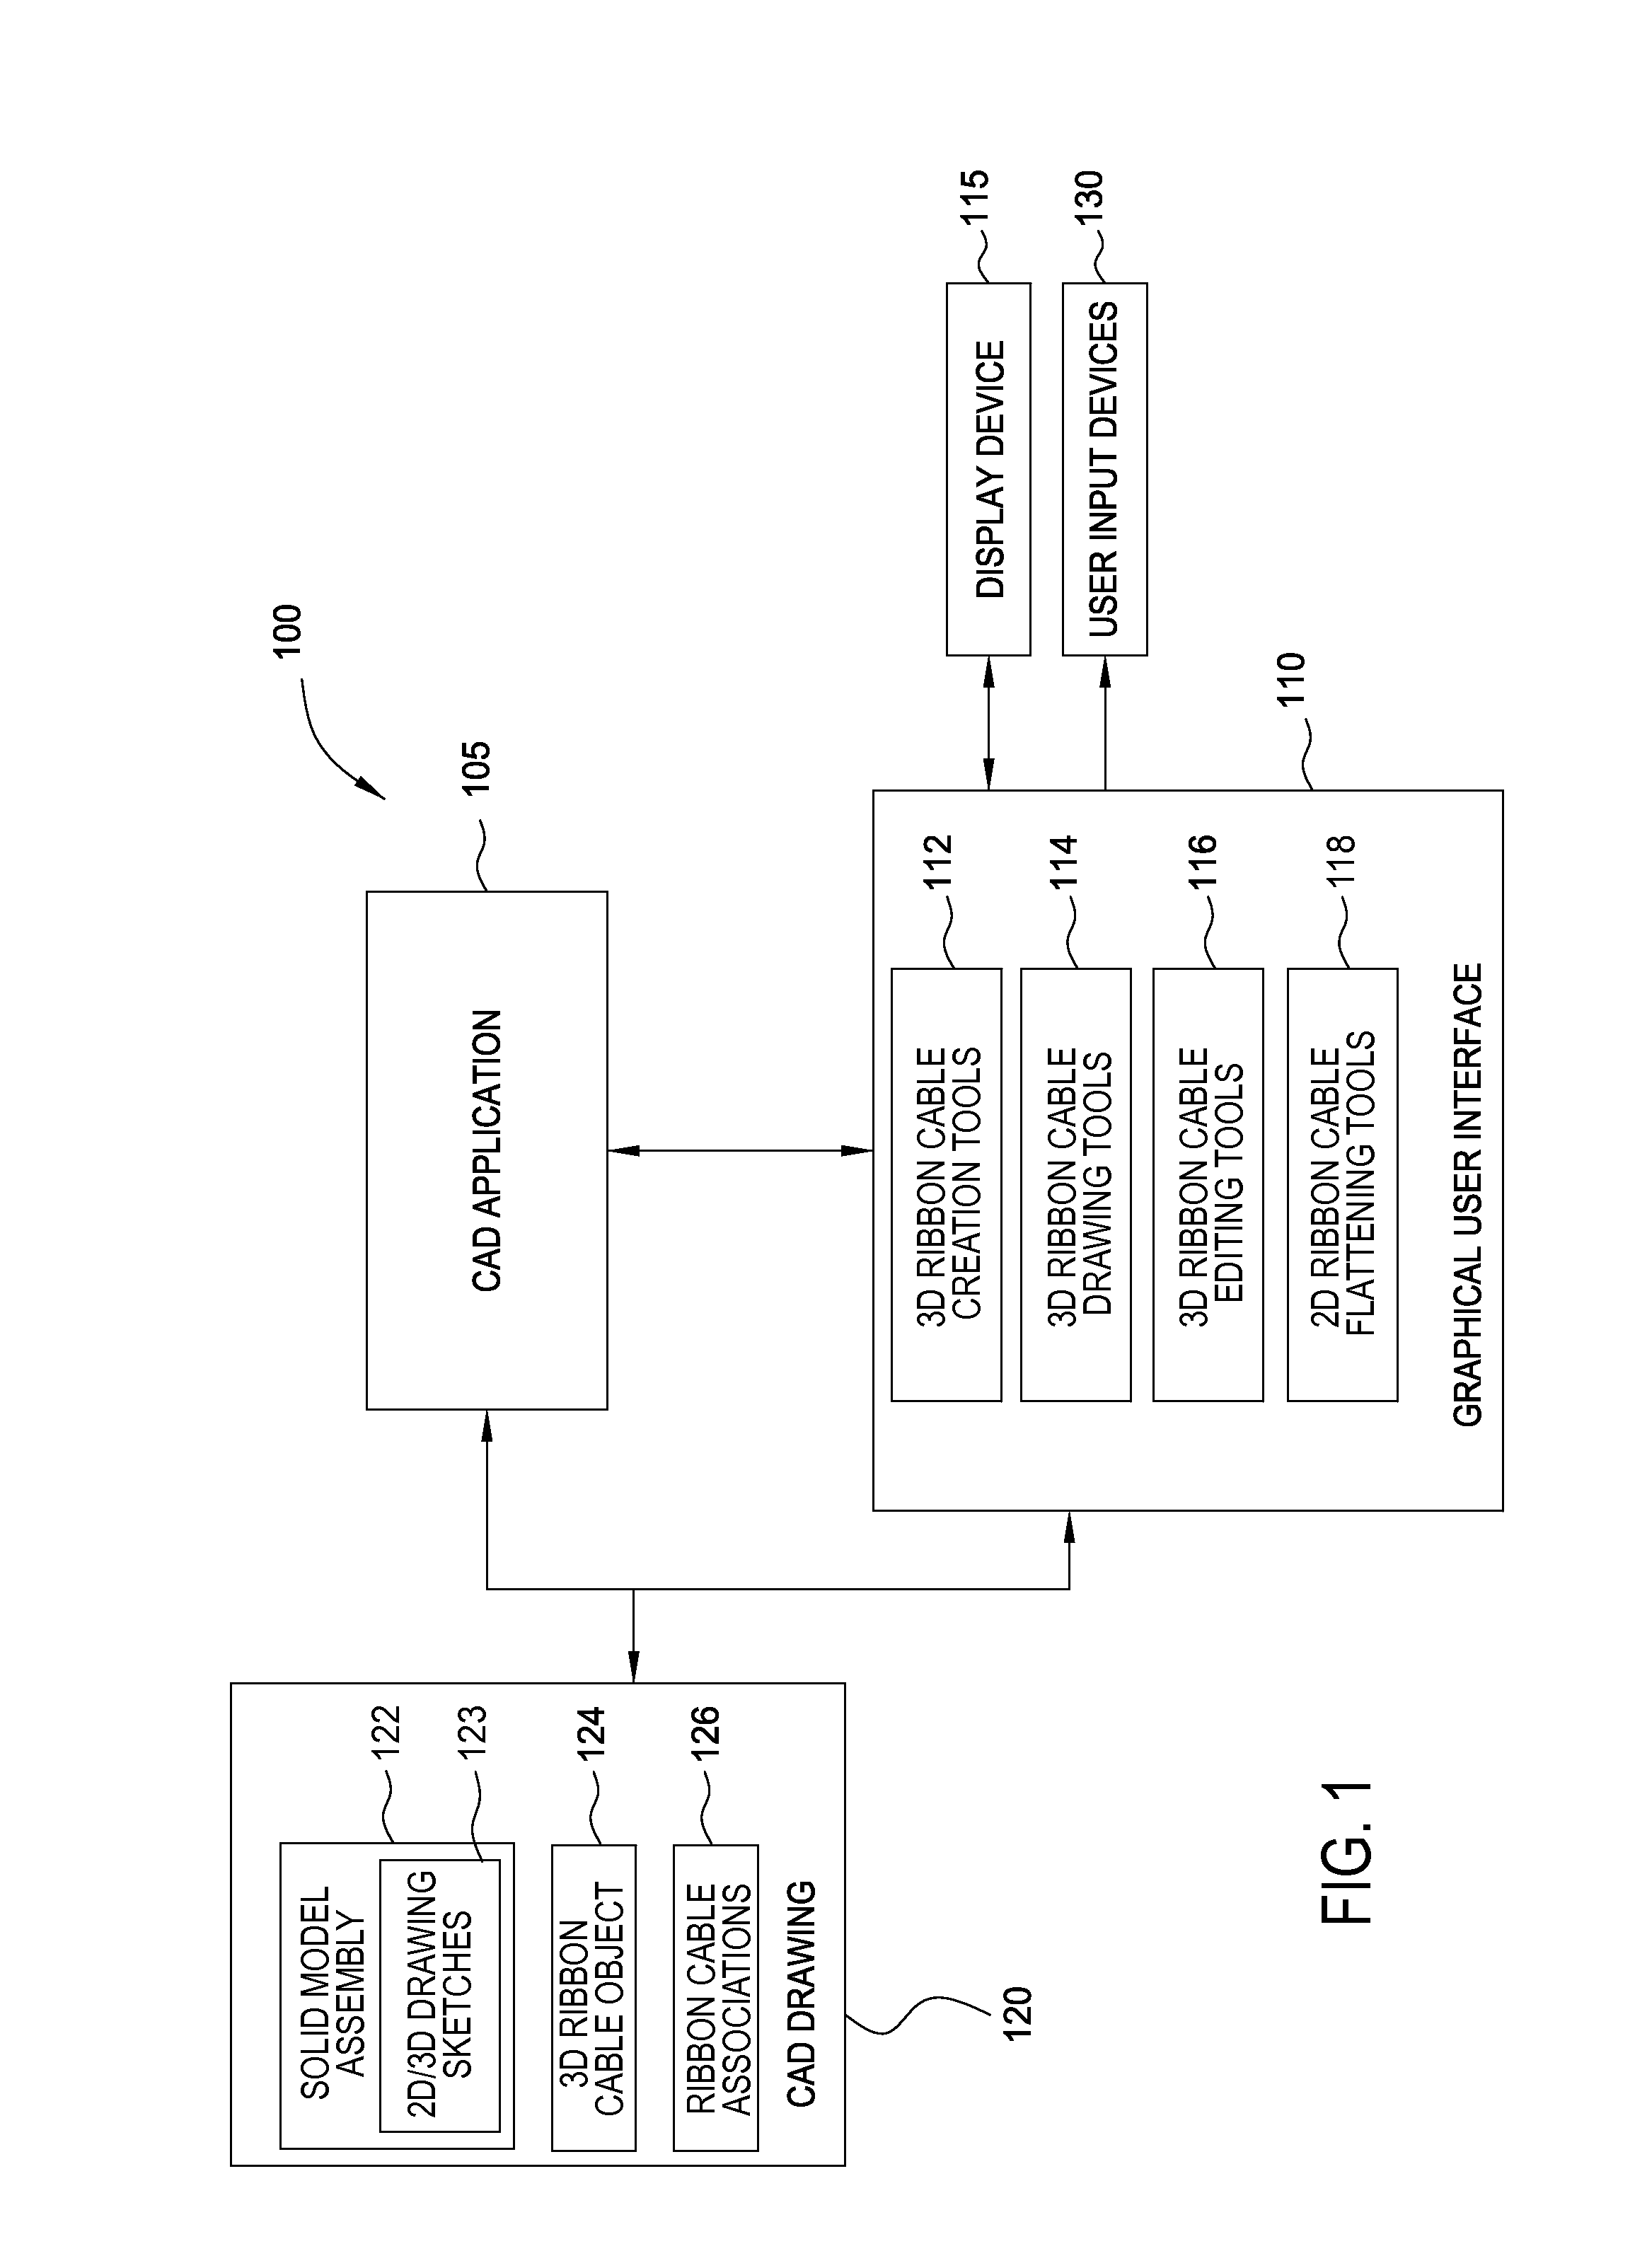 Method for generating three dimensional ribbon cable objects in computer aided design drawings